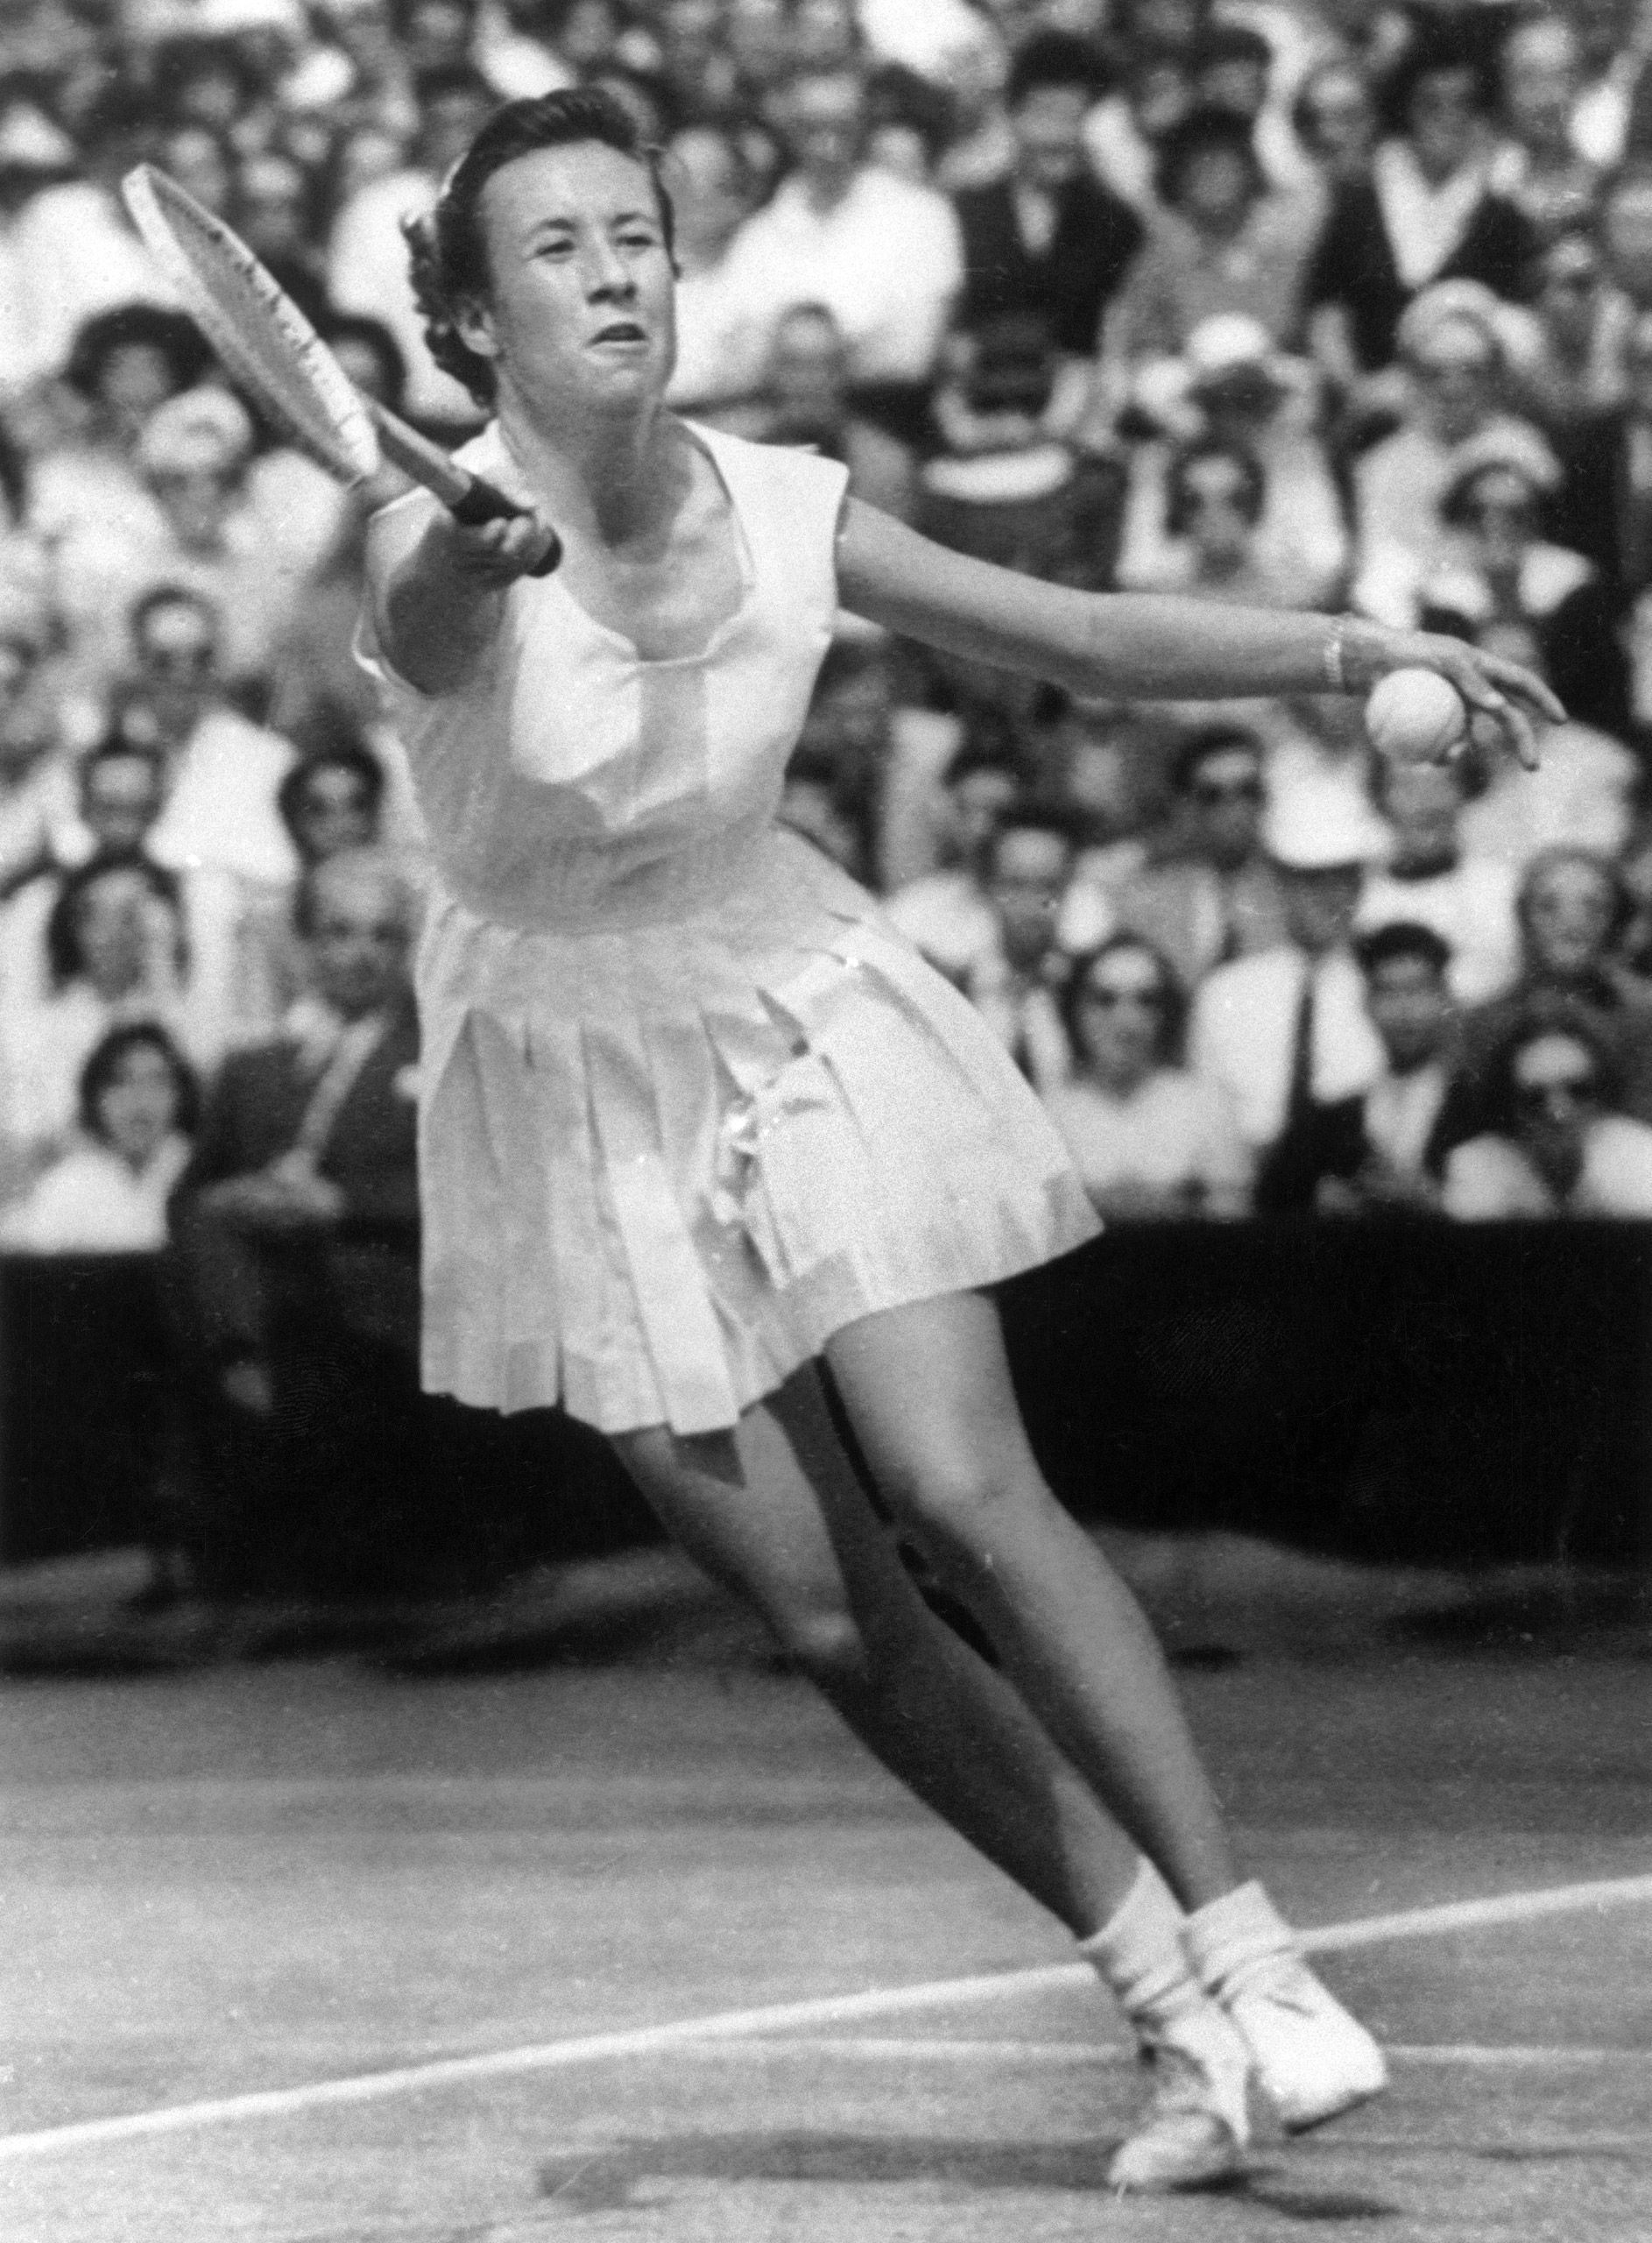 past tennis grand slam winners: see photos of them all | time